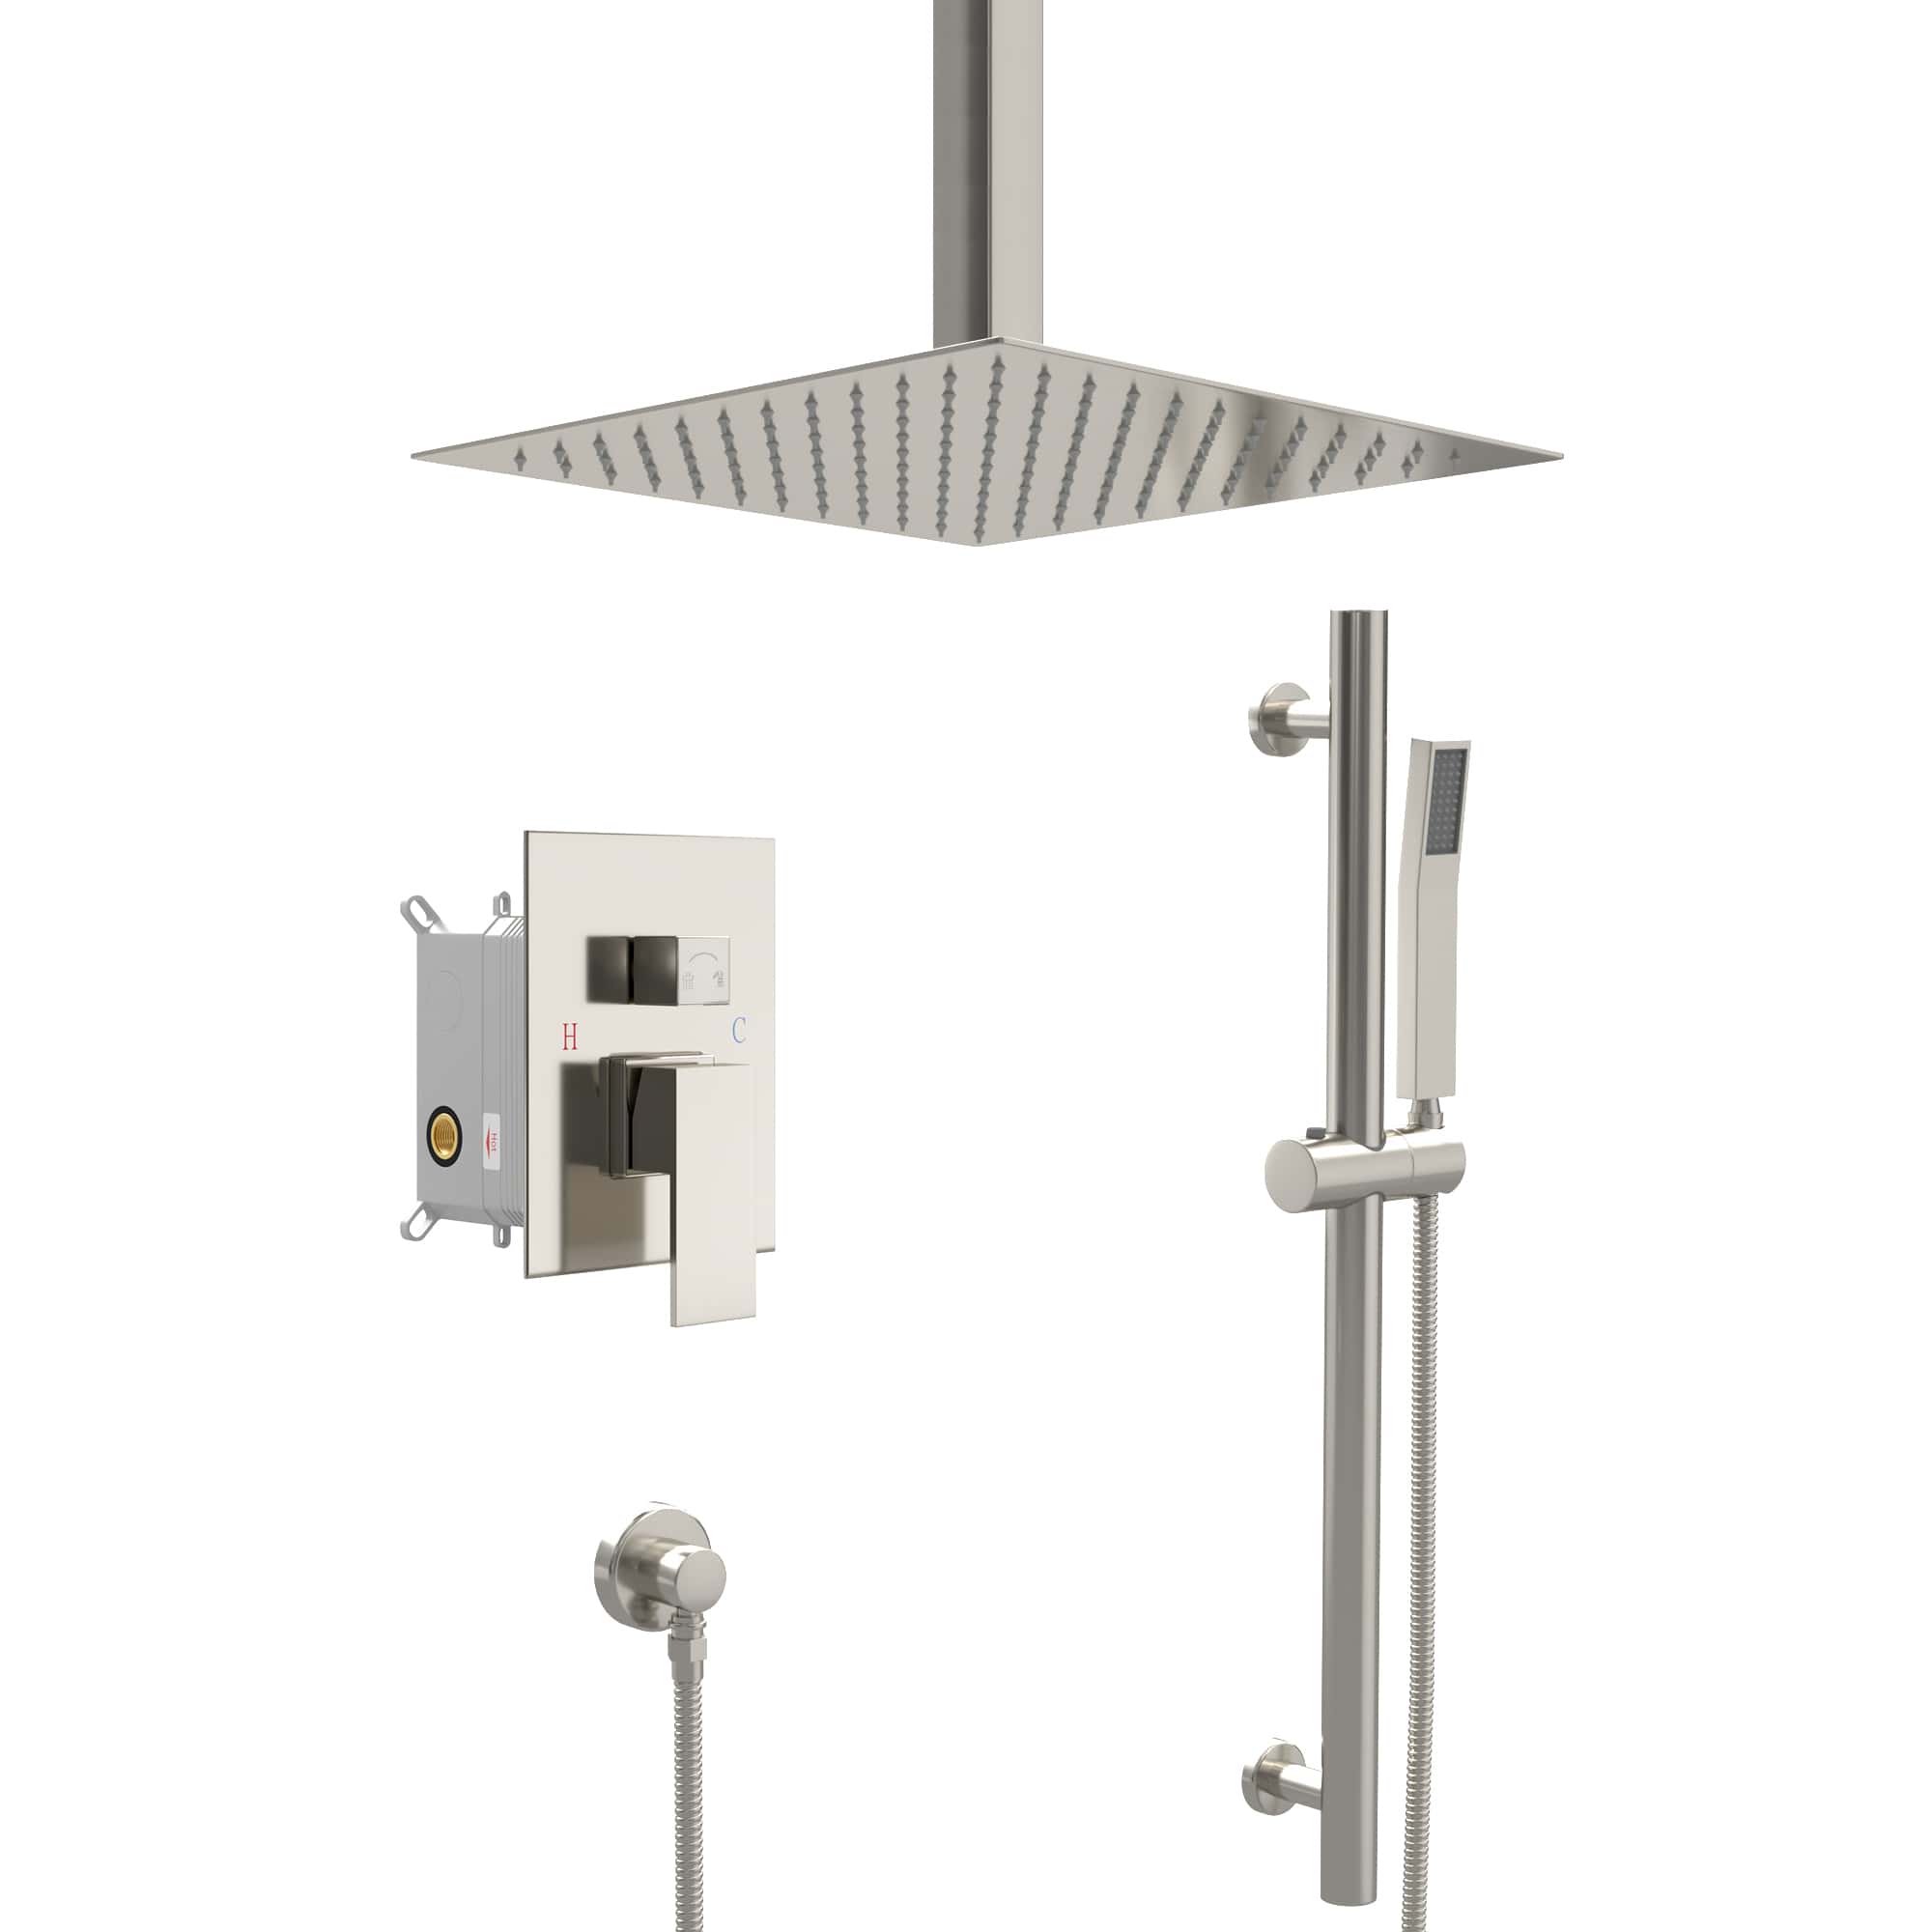 2-Spray Patterns with 1.8 GPM 16 in. Ceiling Mount Dual Shower Heads in Brushed Nickel (Lifting Bar Included)